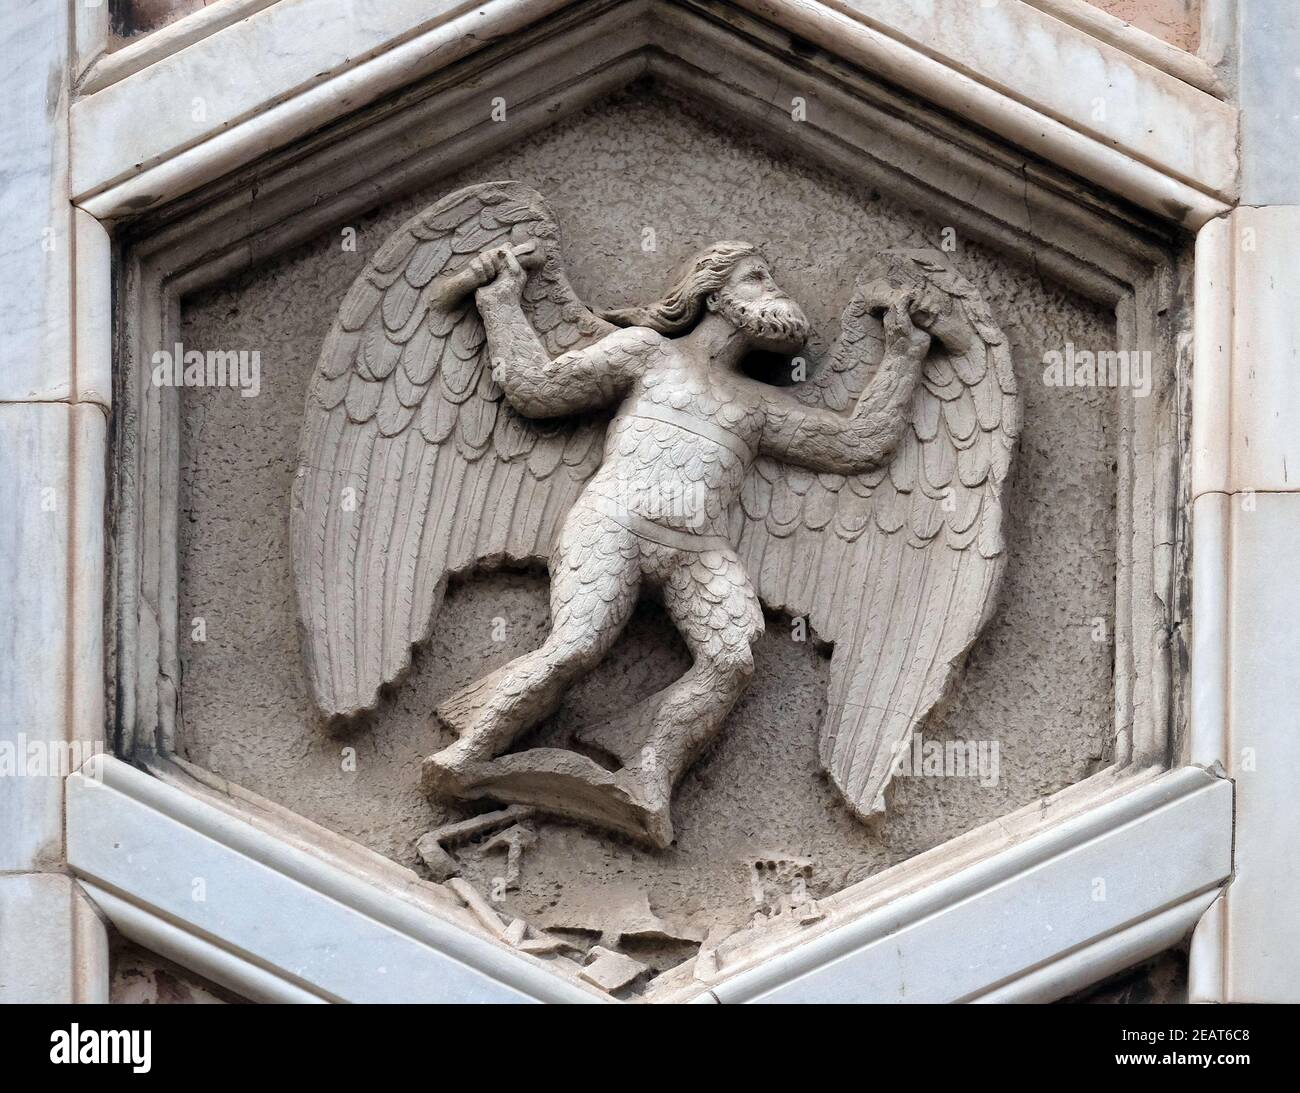 Daedalus as personification of mechanical arts from the workshop of Andrea Pisano, Relief on Giotto Campanile of Cattedrale di Santa Maria del Fiore (Cathedral of Saint Mary of the Flower), Florence, Italy Stock Photo